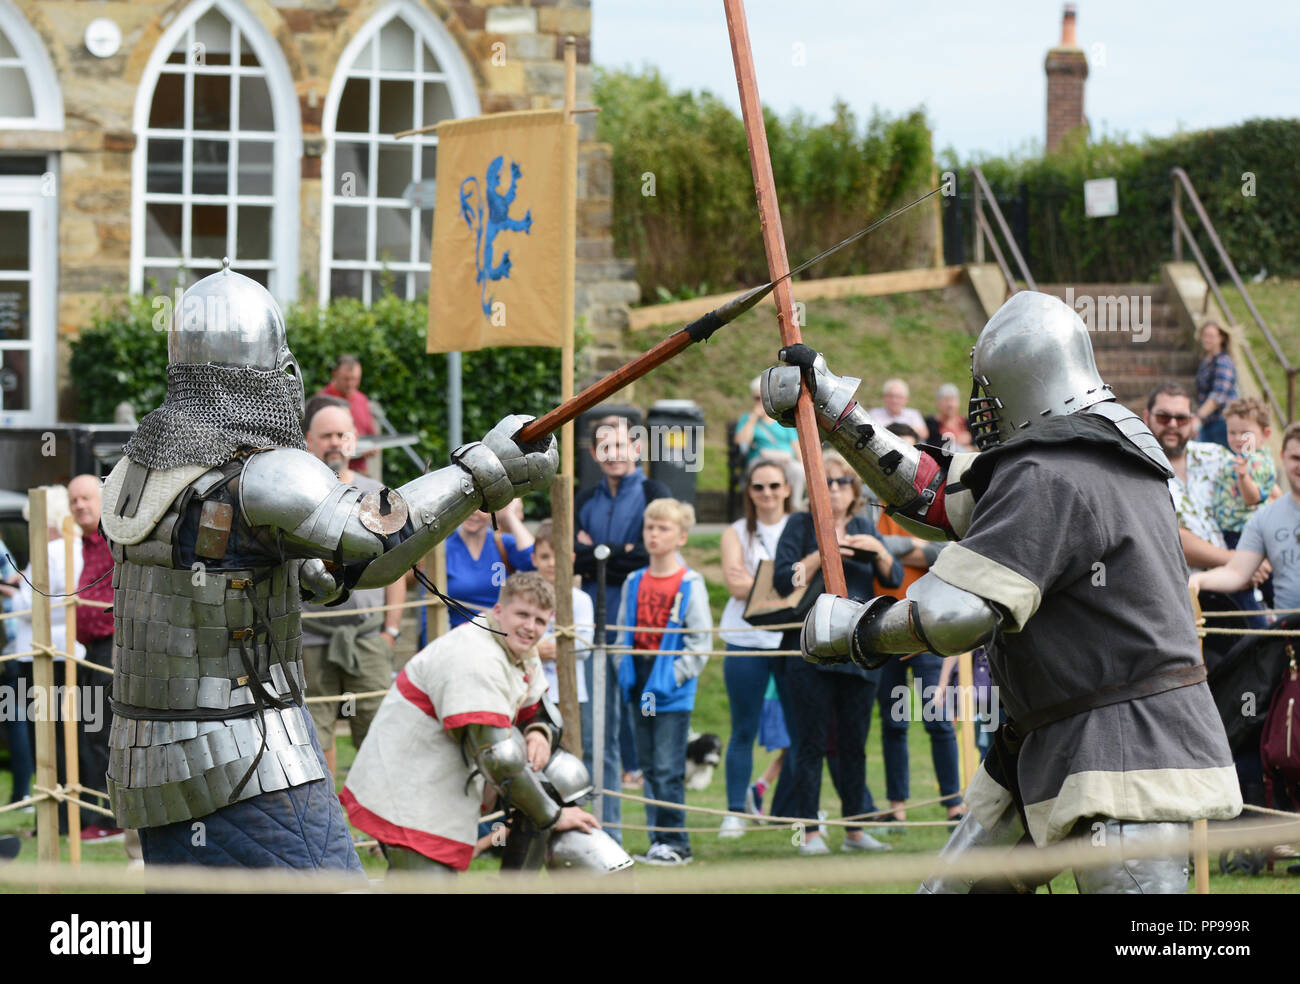 TONBRIDGE, ENGLAND - SEPTEMBER 9, 2018: Combat fighter in medieval body armour strikes his opponent's weapon with a pole arm at Tonbridge Castle Medie Stock Photo